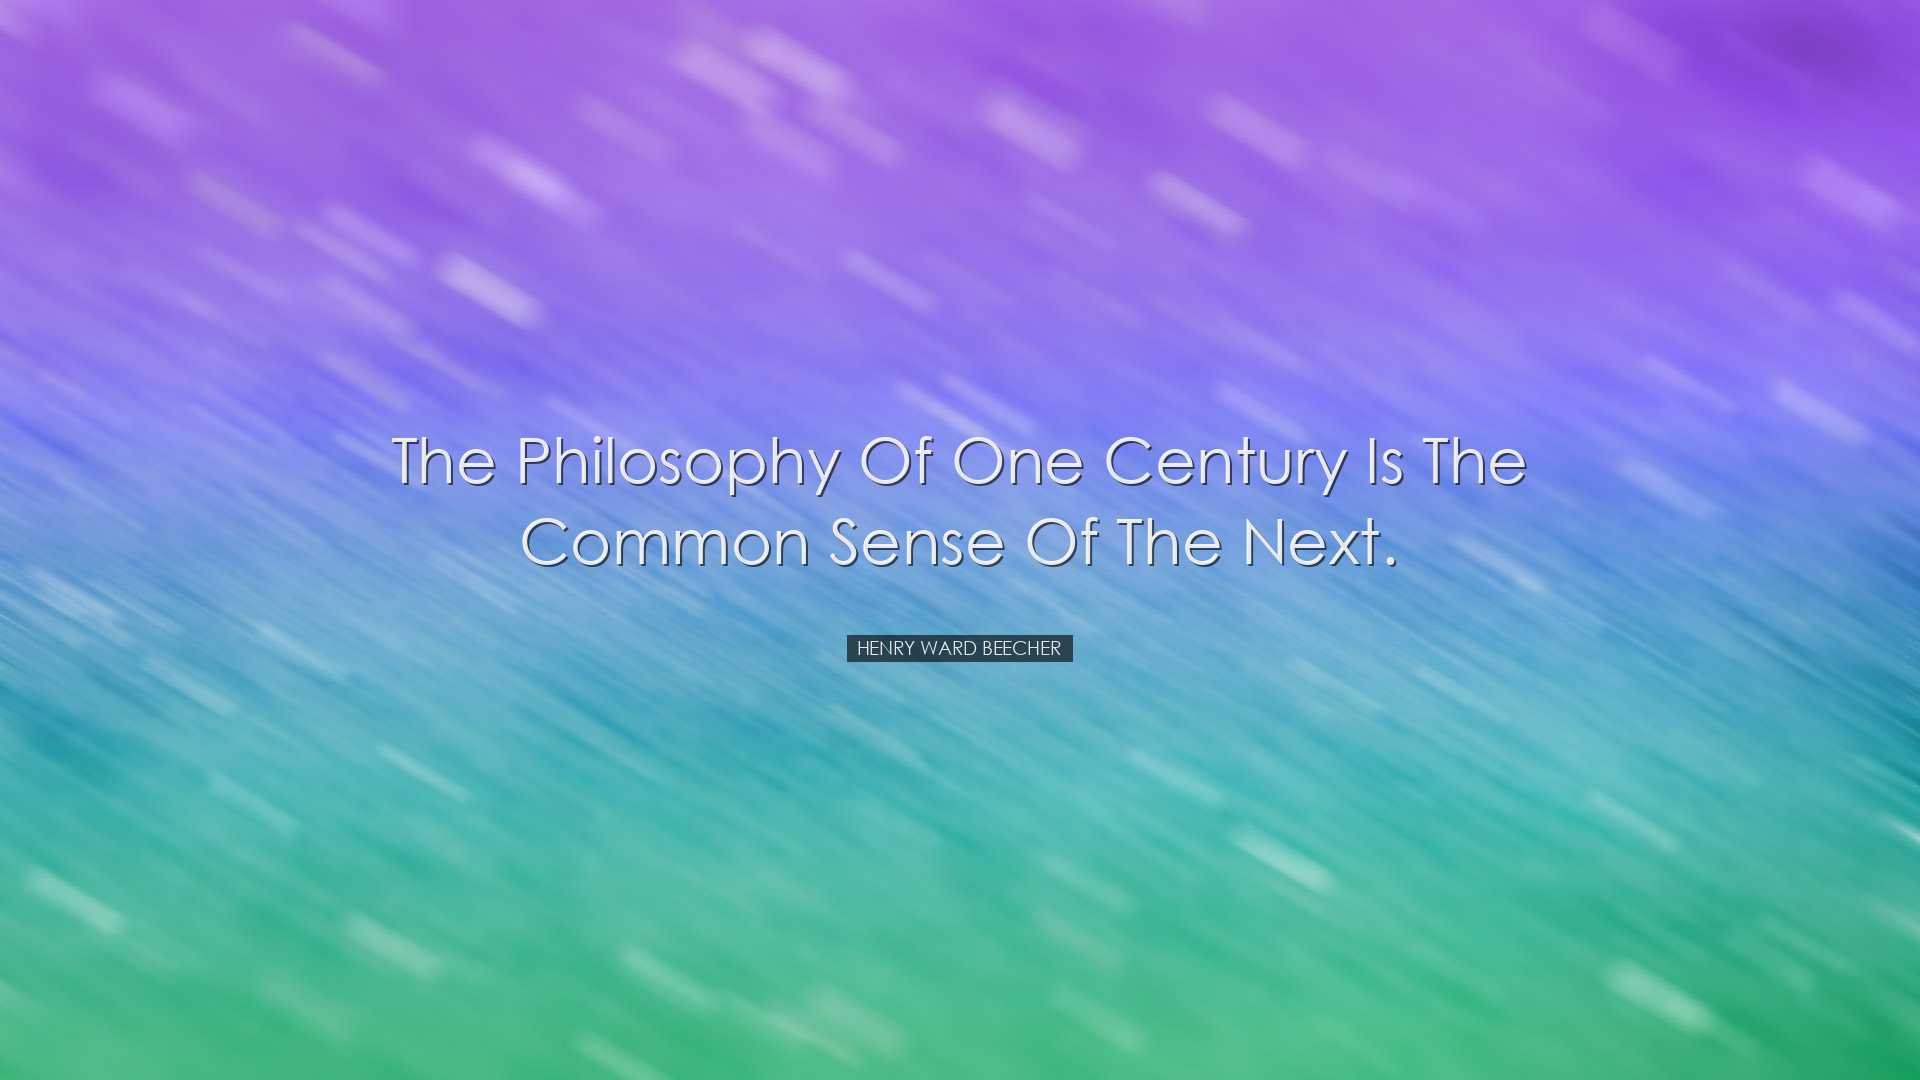 The philosophy of one century is the common sense of the next. - H